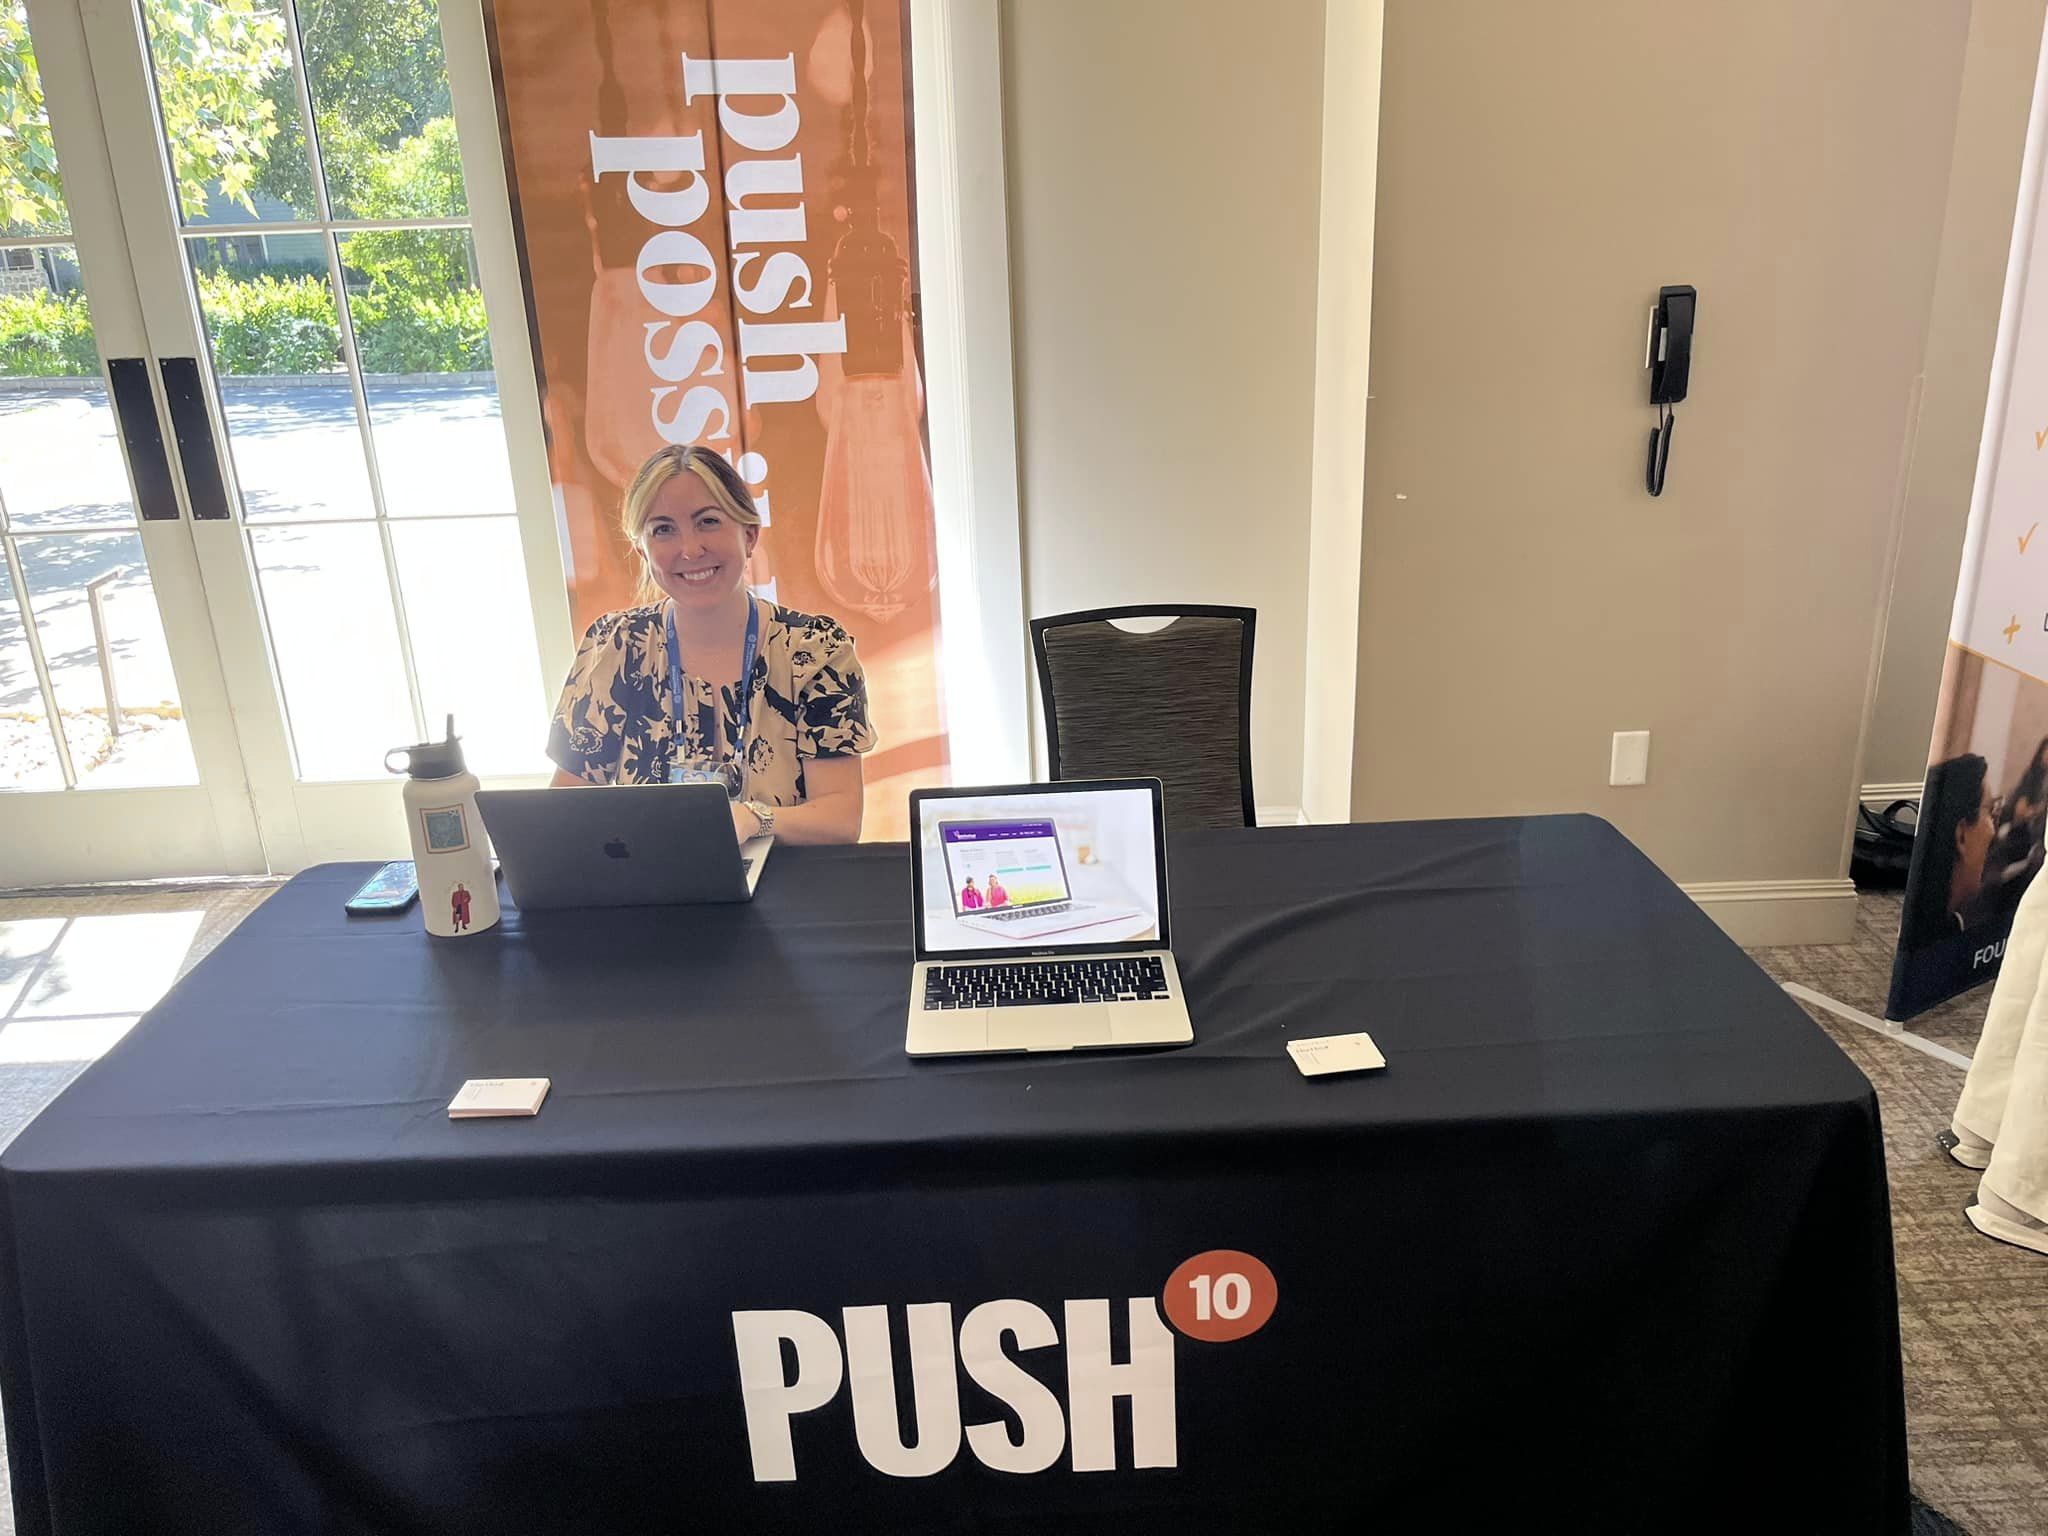 Push10 Branding agency Account Manager, Lisa Lloyd attends the Philanthropy Southwest Conference in Austin Texas